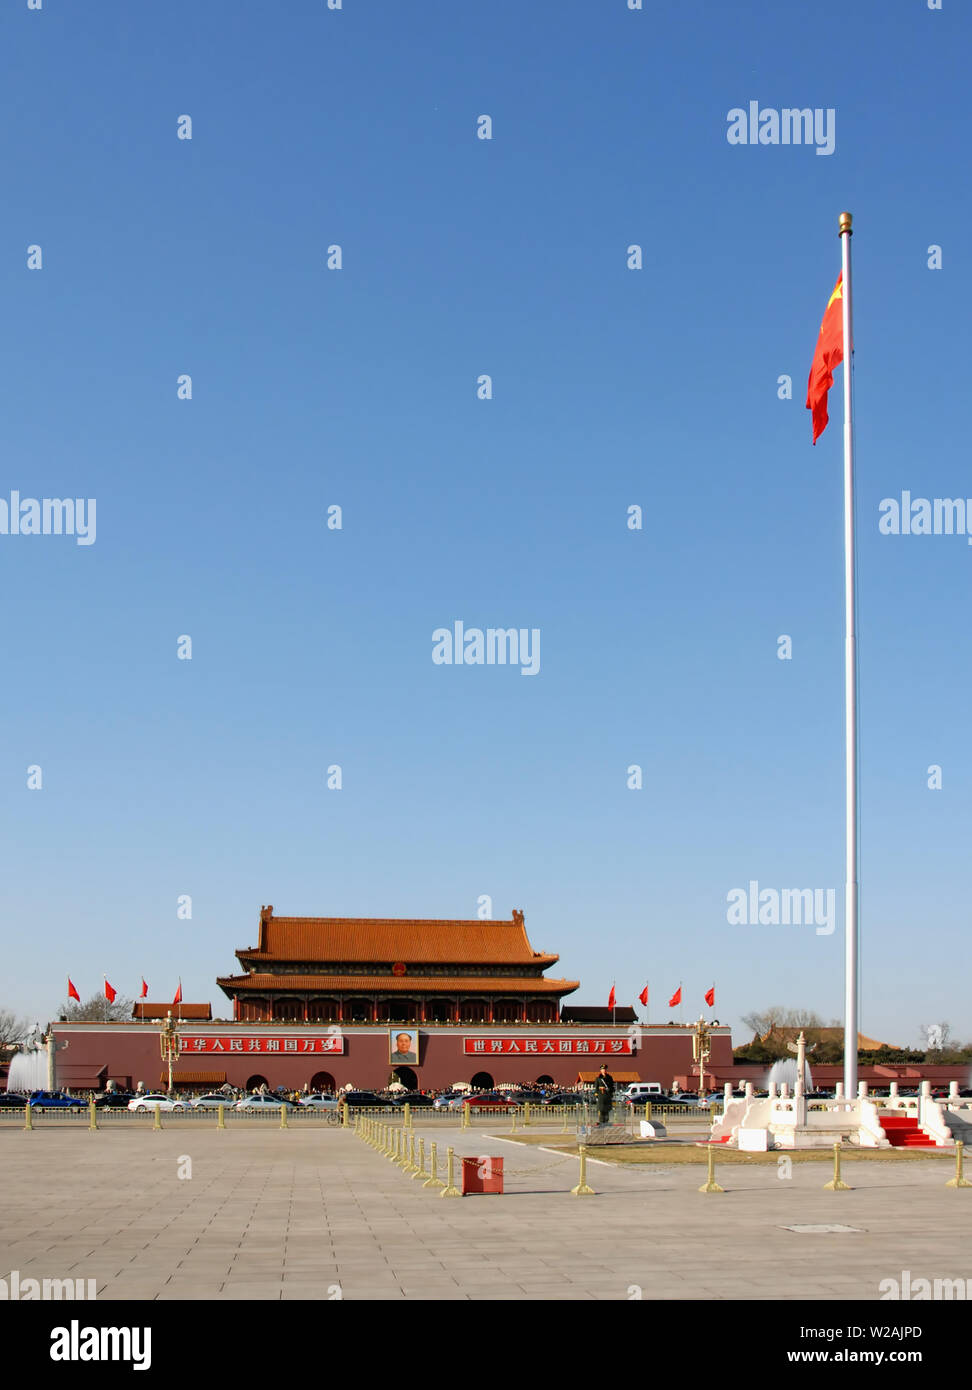 Tiananmen Square, Beijing, China and Gate of Heavenly Peace. Tiananmen Square is a famous landmark in Beijing. Tiananmen leads to the Forbidden City. Stock Photo